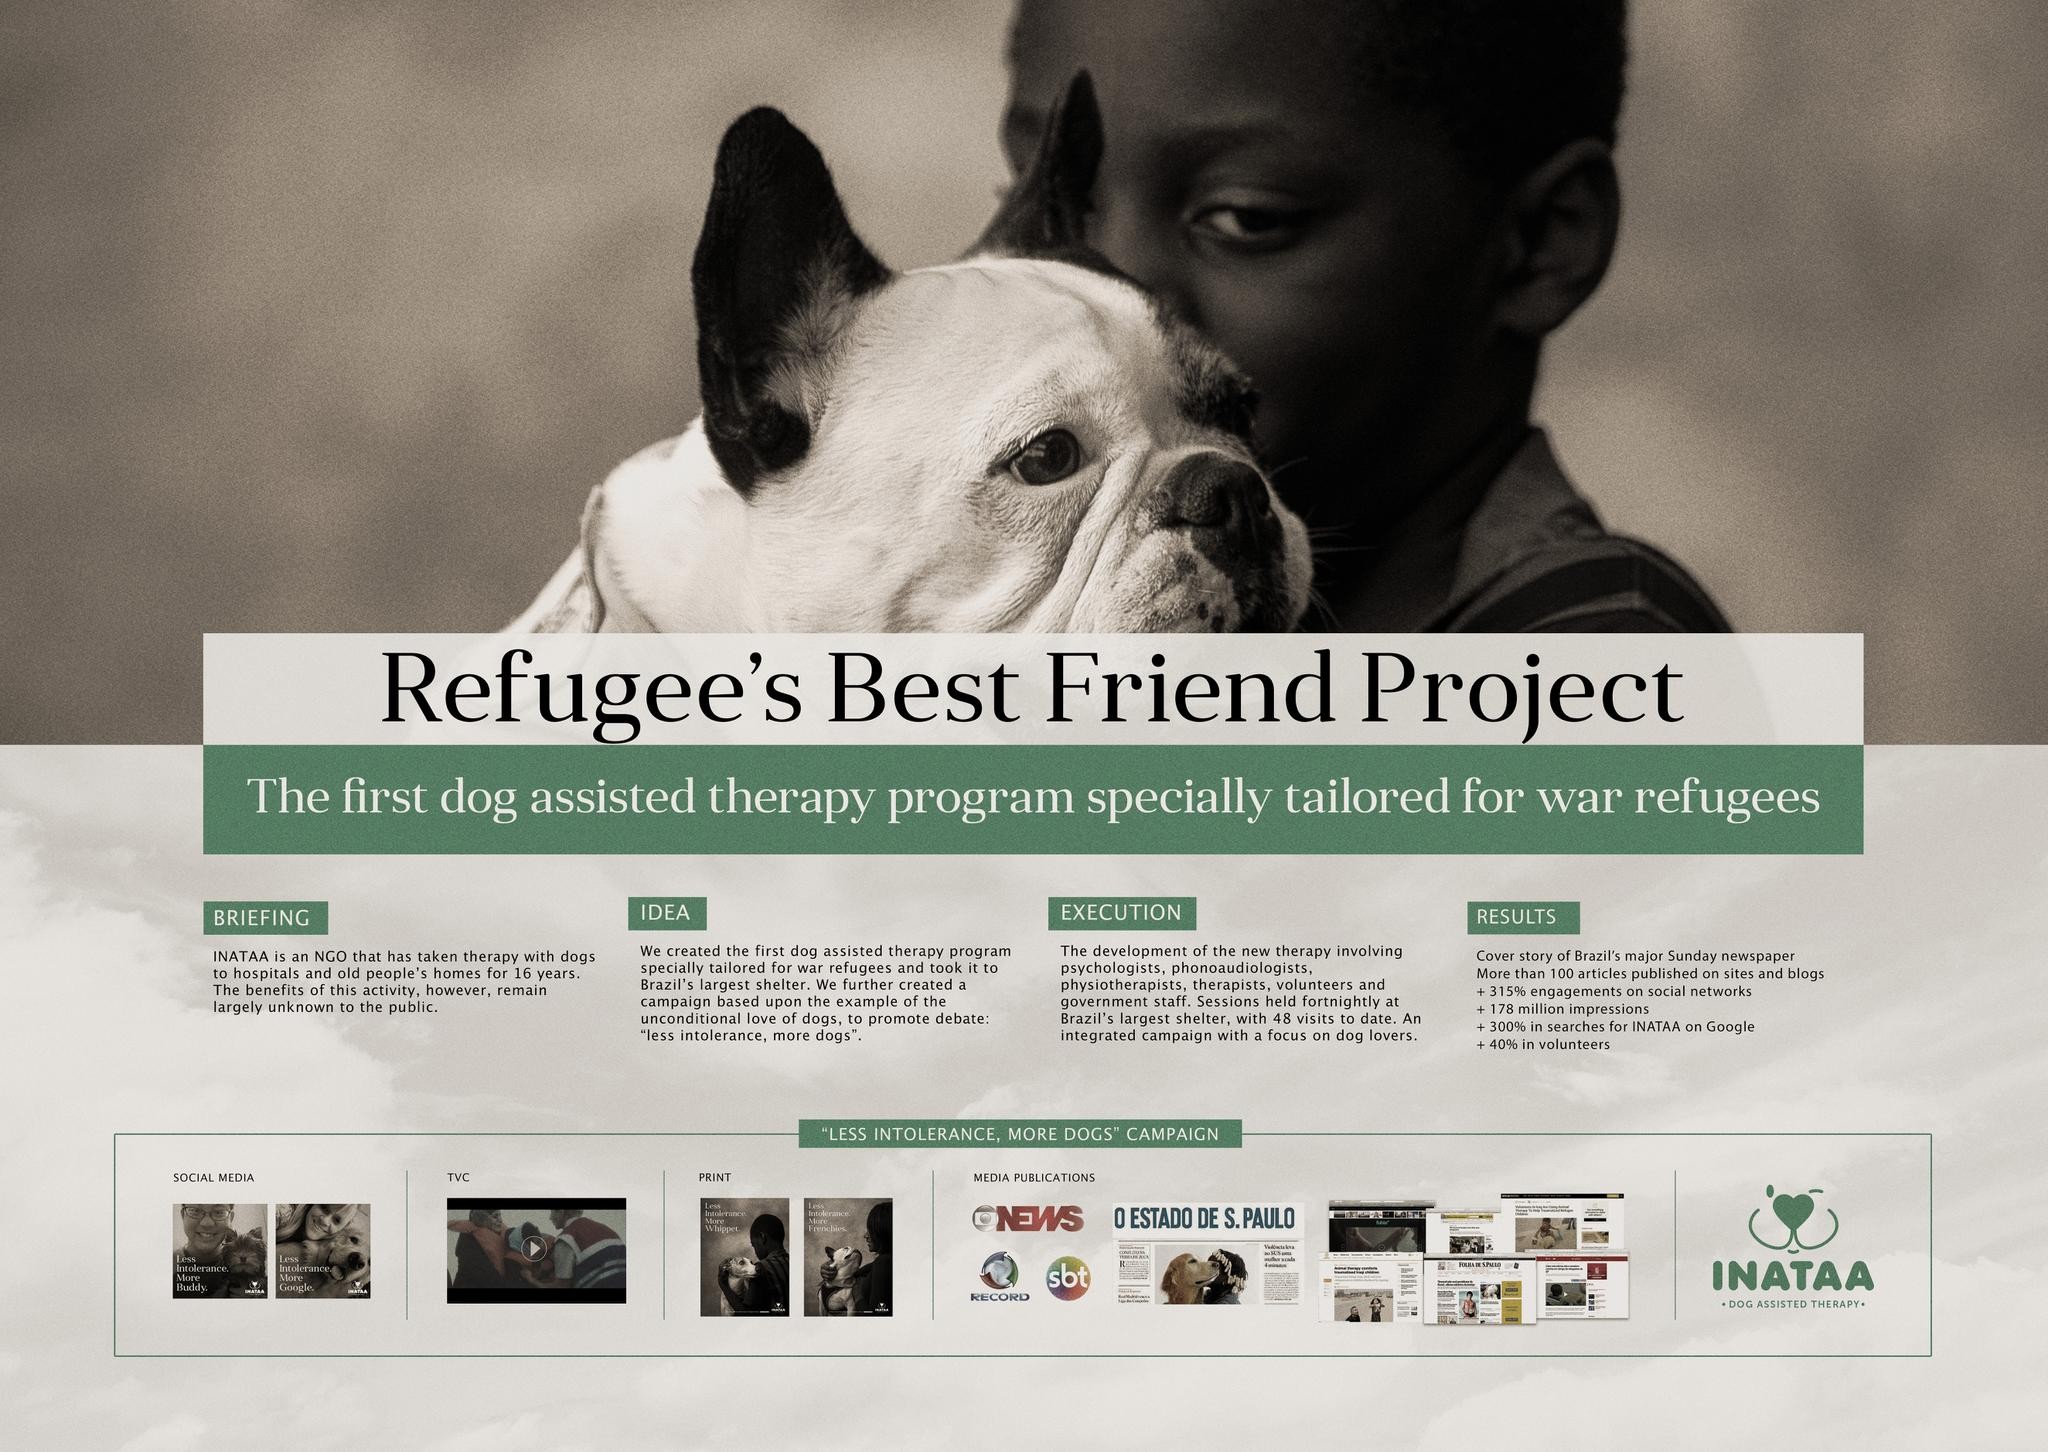 Refugee's Best Friend Project